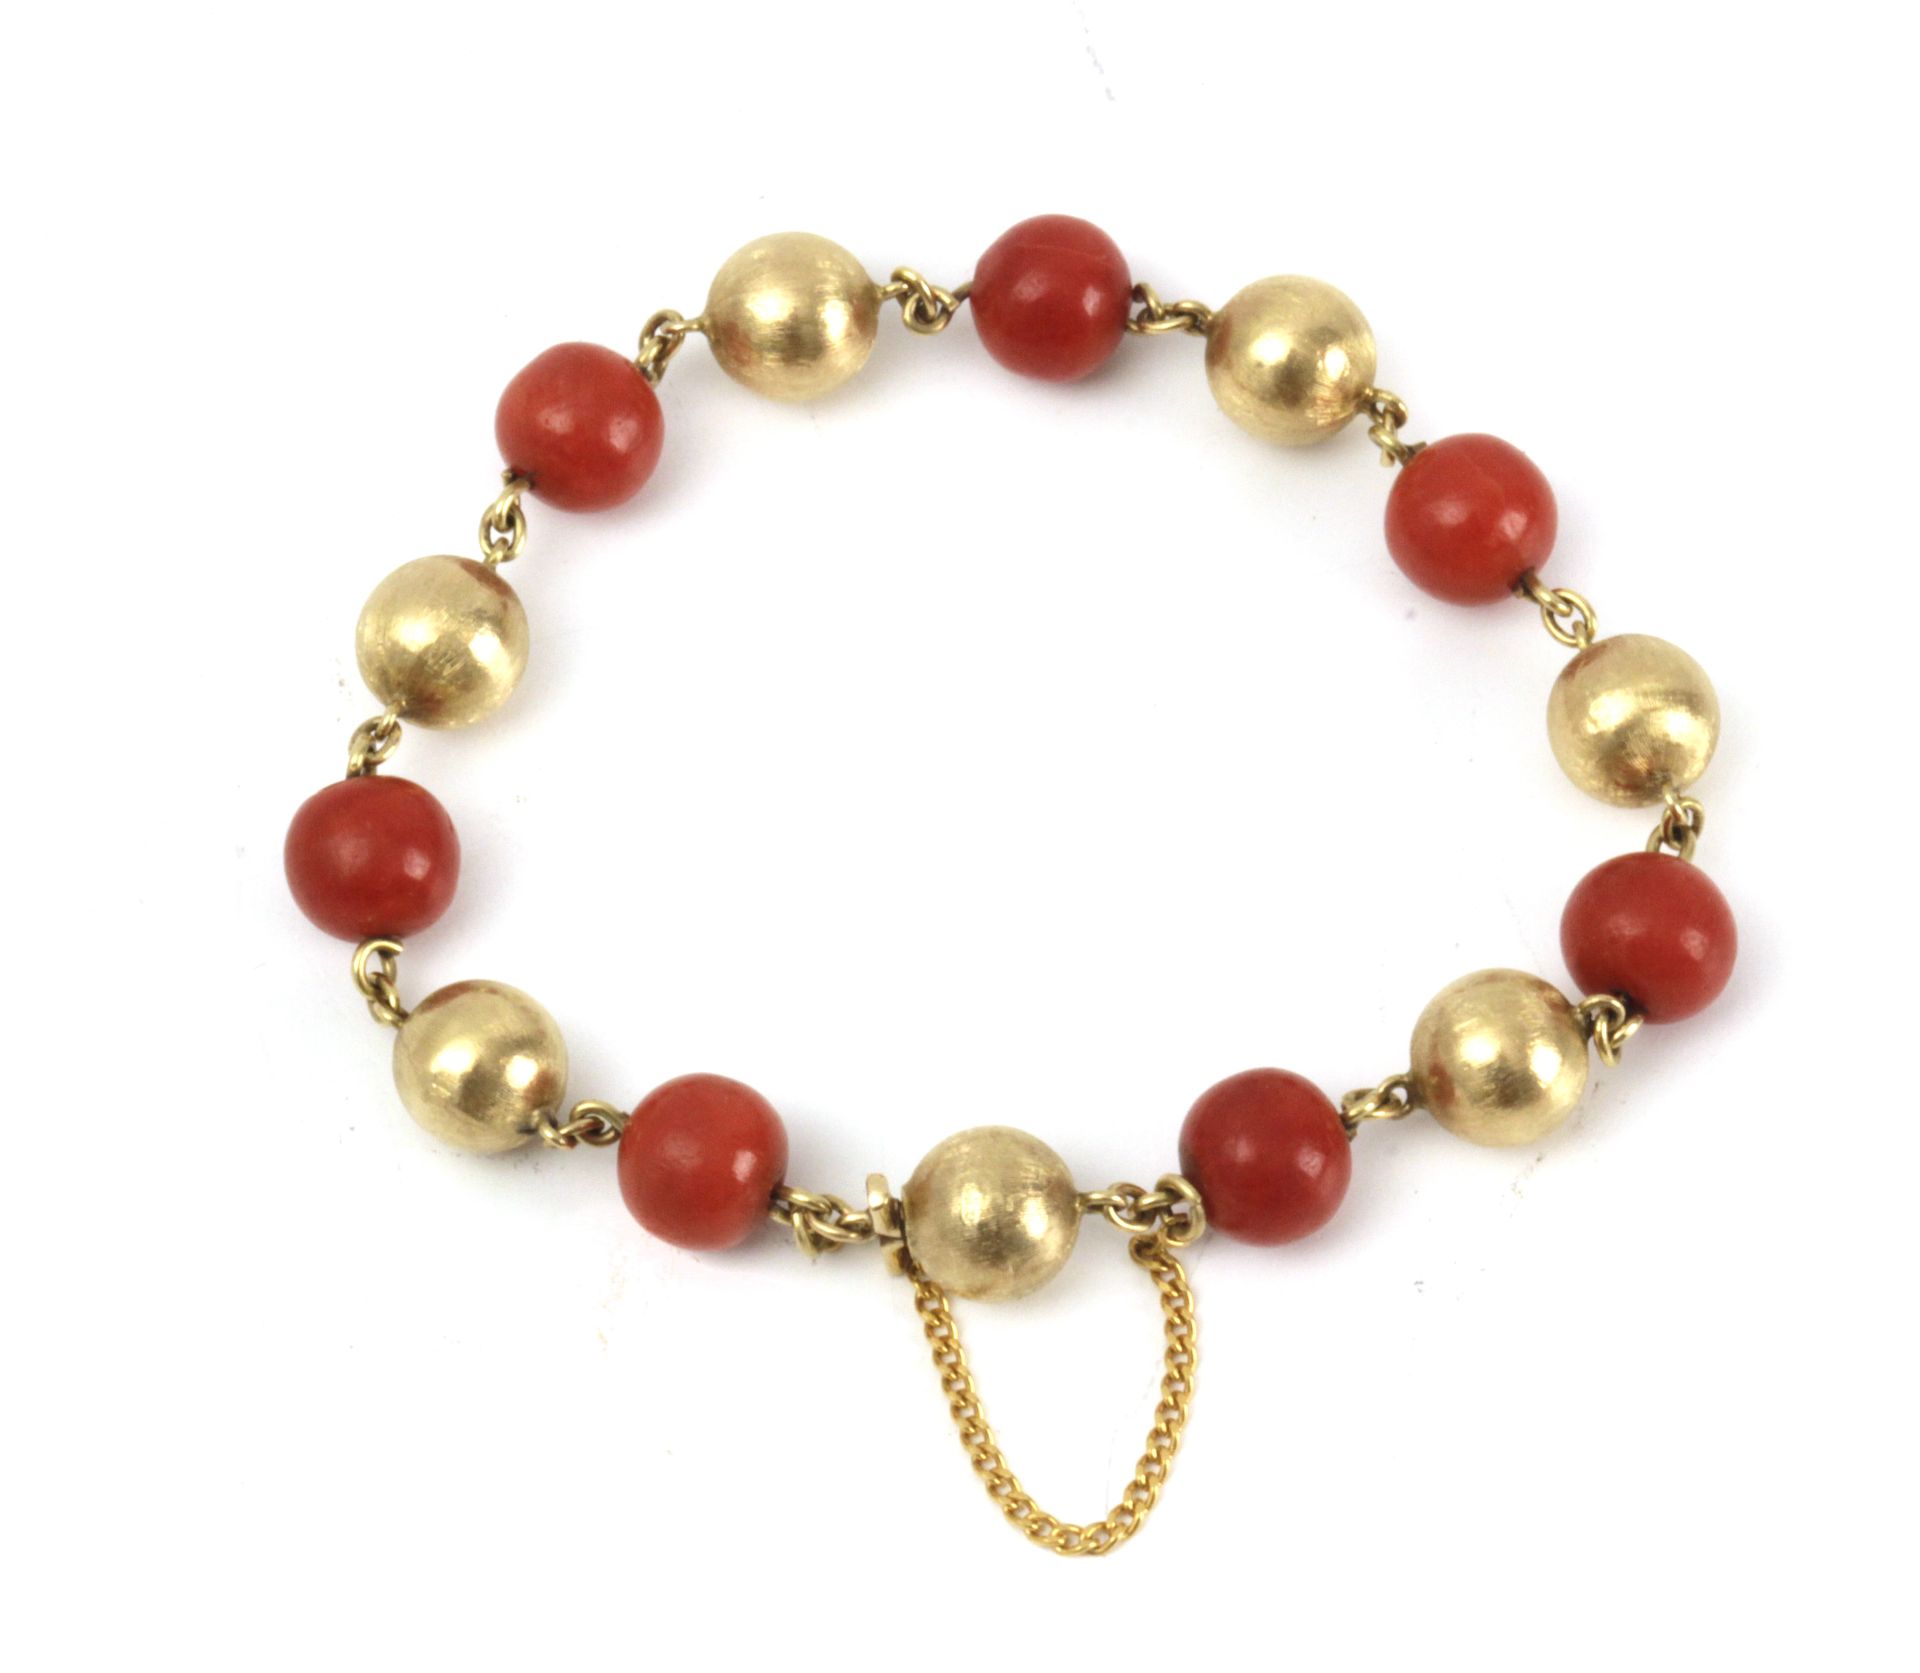 A 20th century 18k. yellow gold and coral beads bracelet